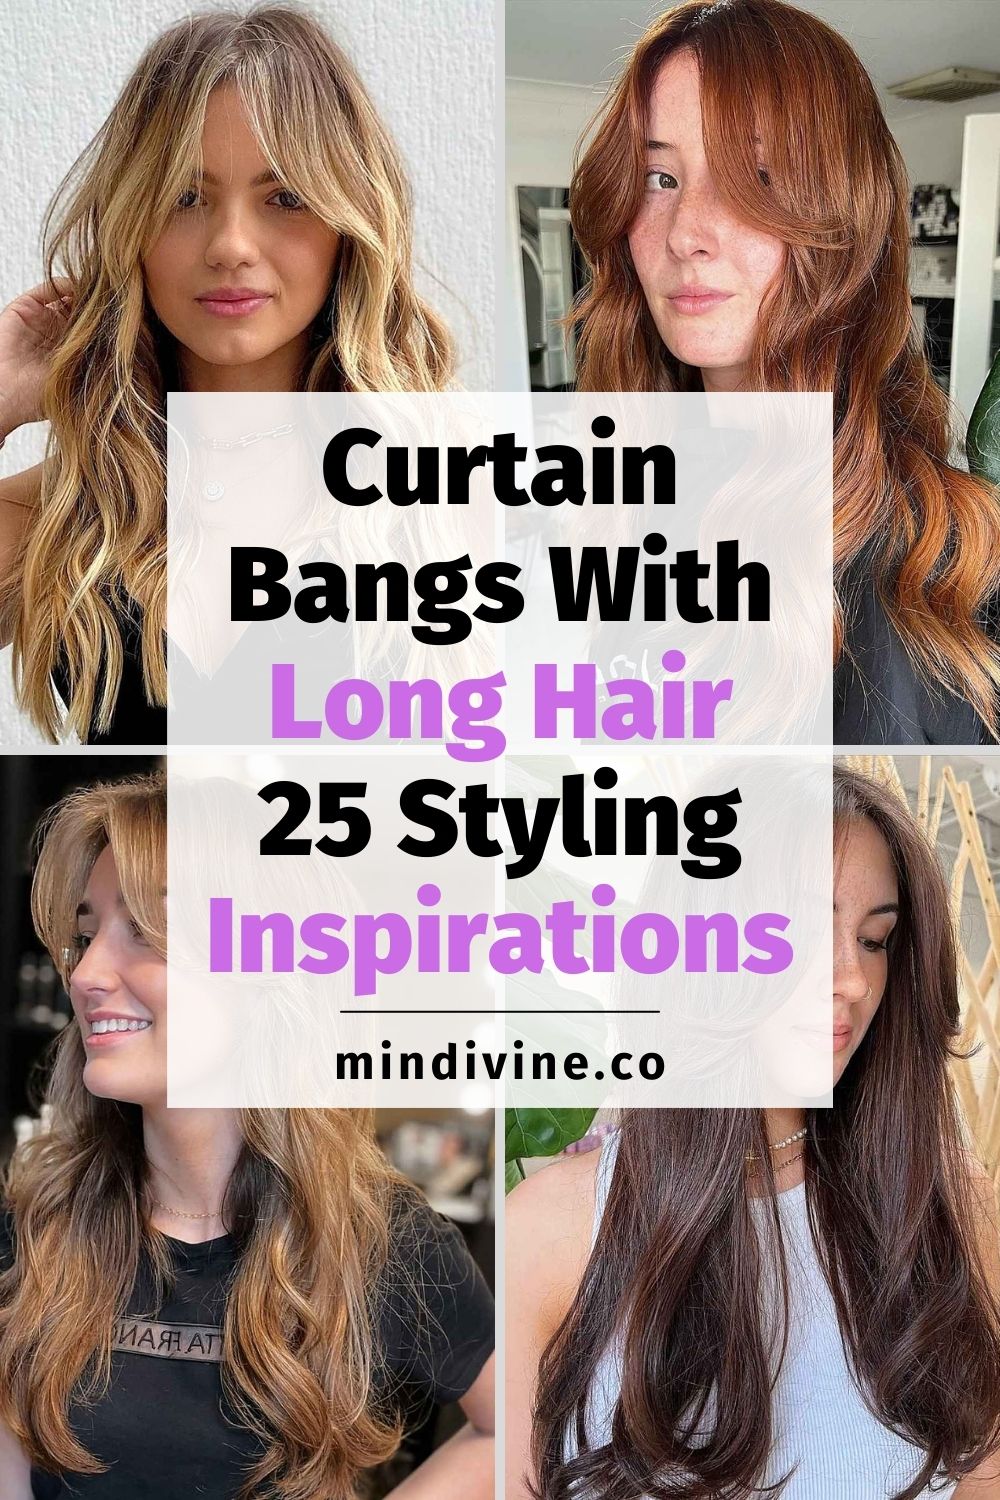 4 styles for curtain bangs with long hair.